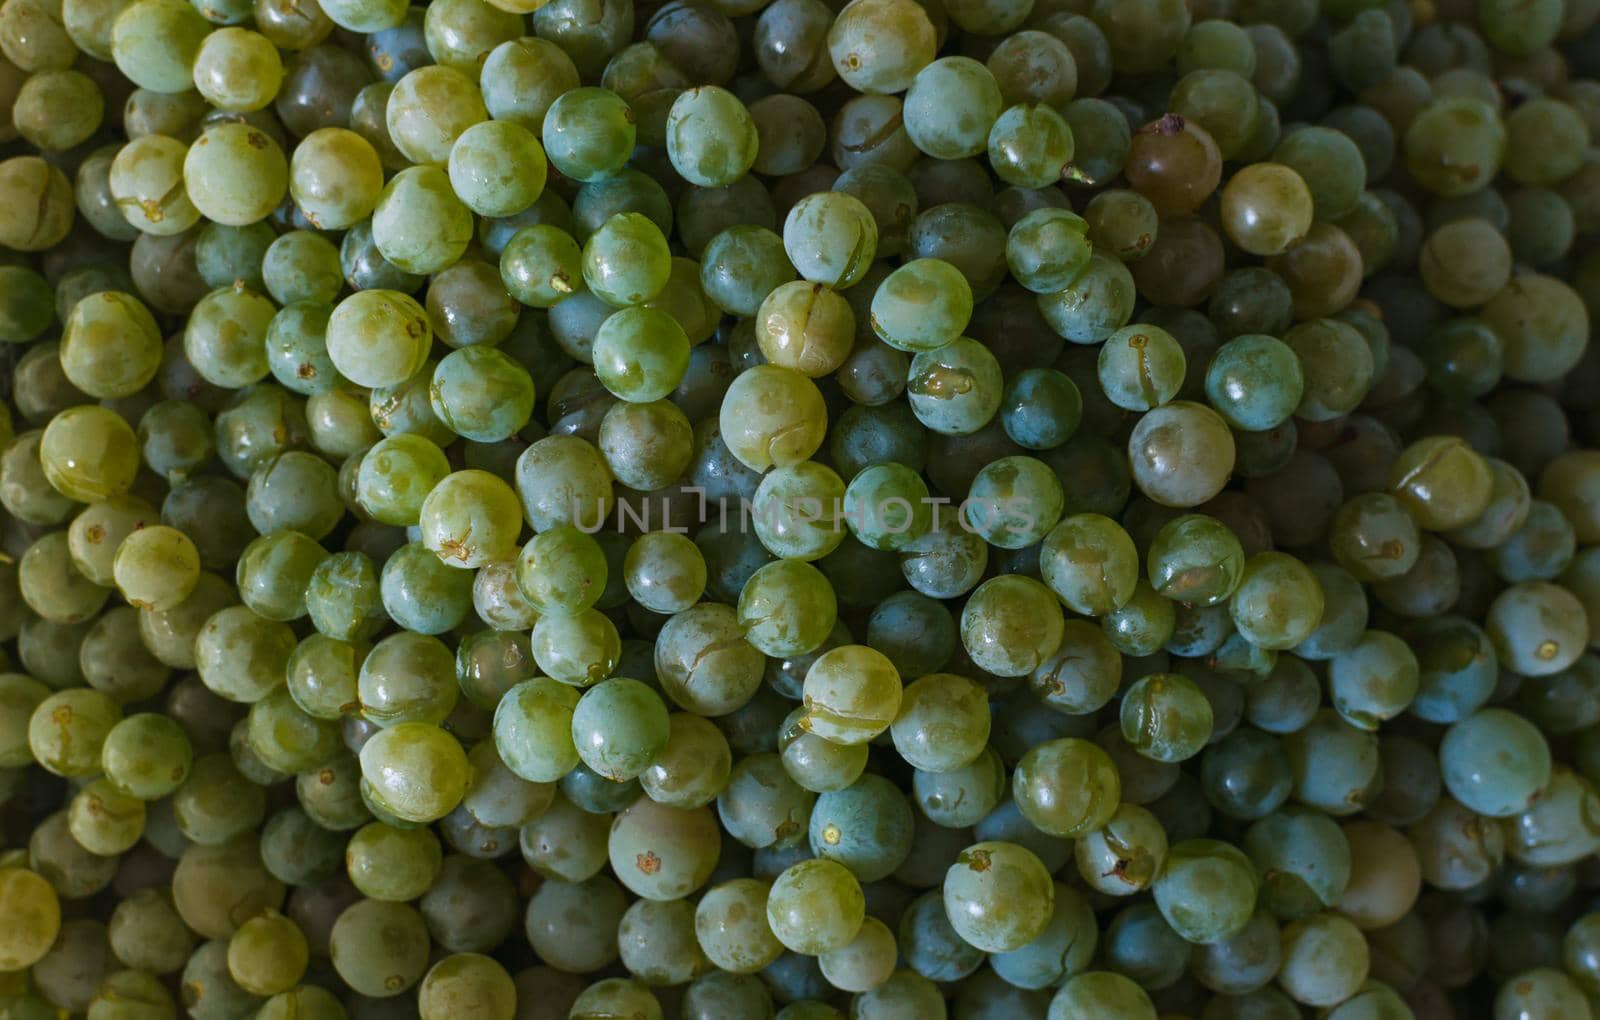 White grapes for wine production, background. Ripe crop ready for production in the fall. Vineyard in France. Template for design. Copy space.